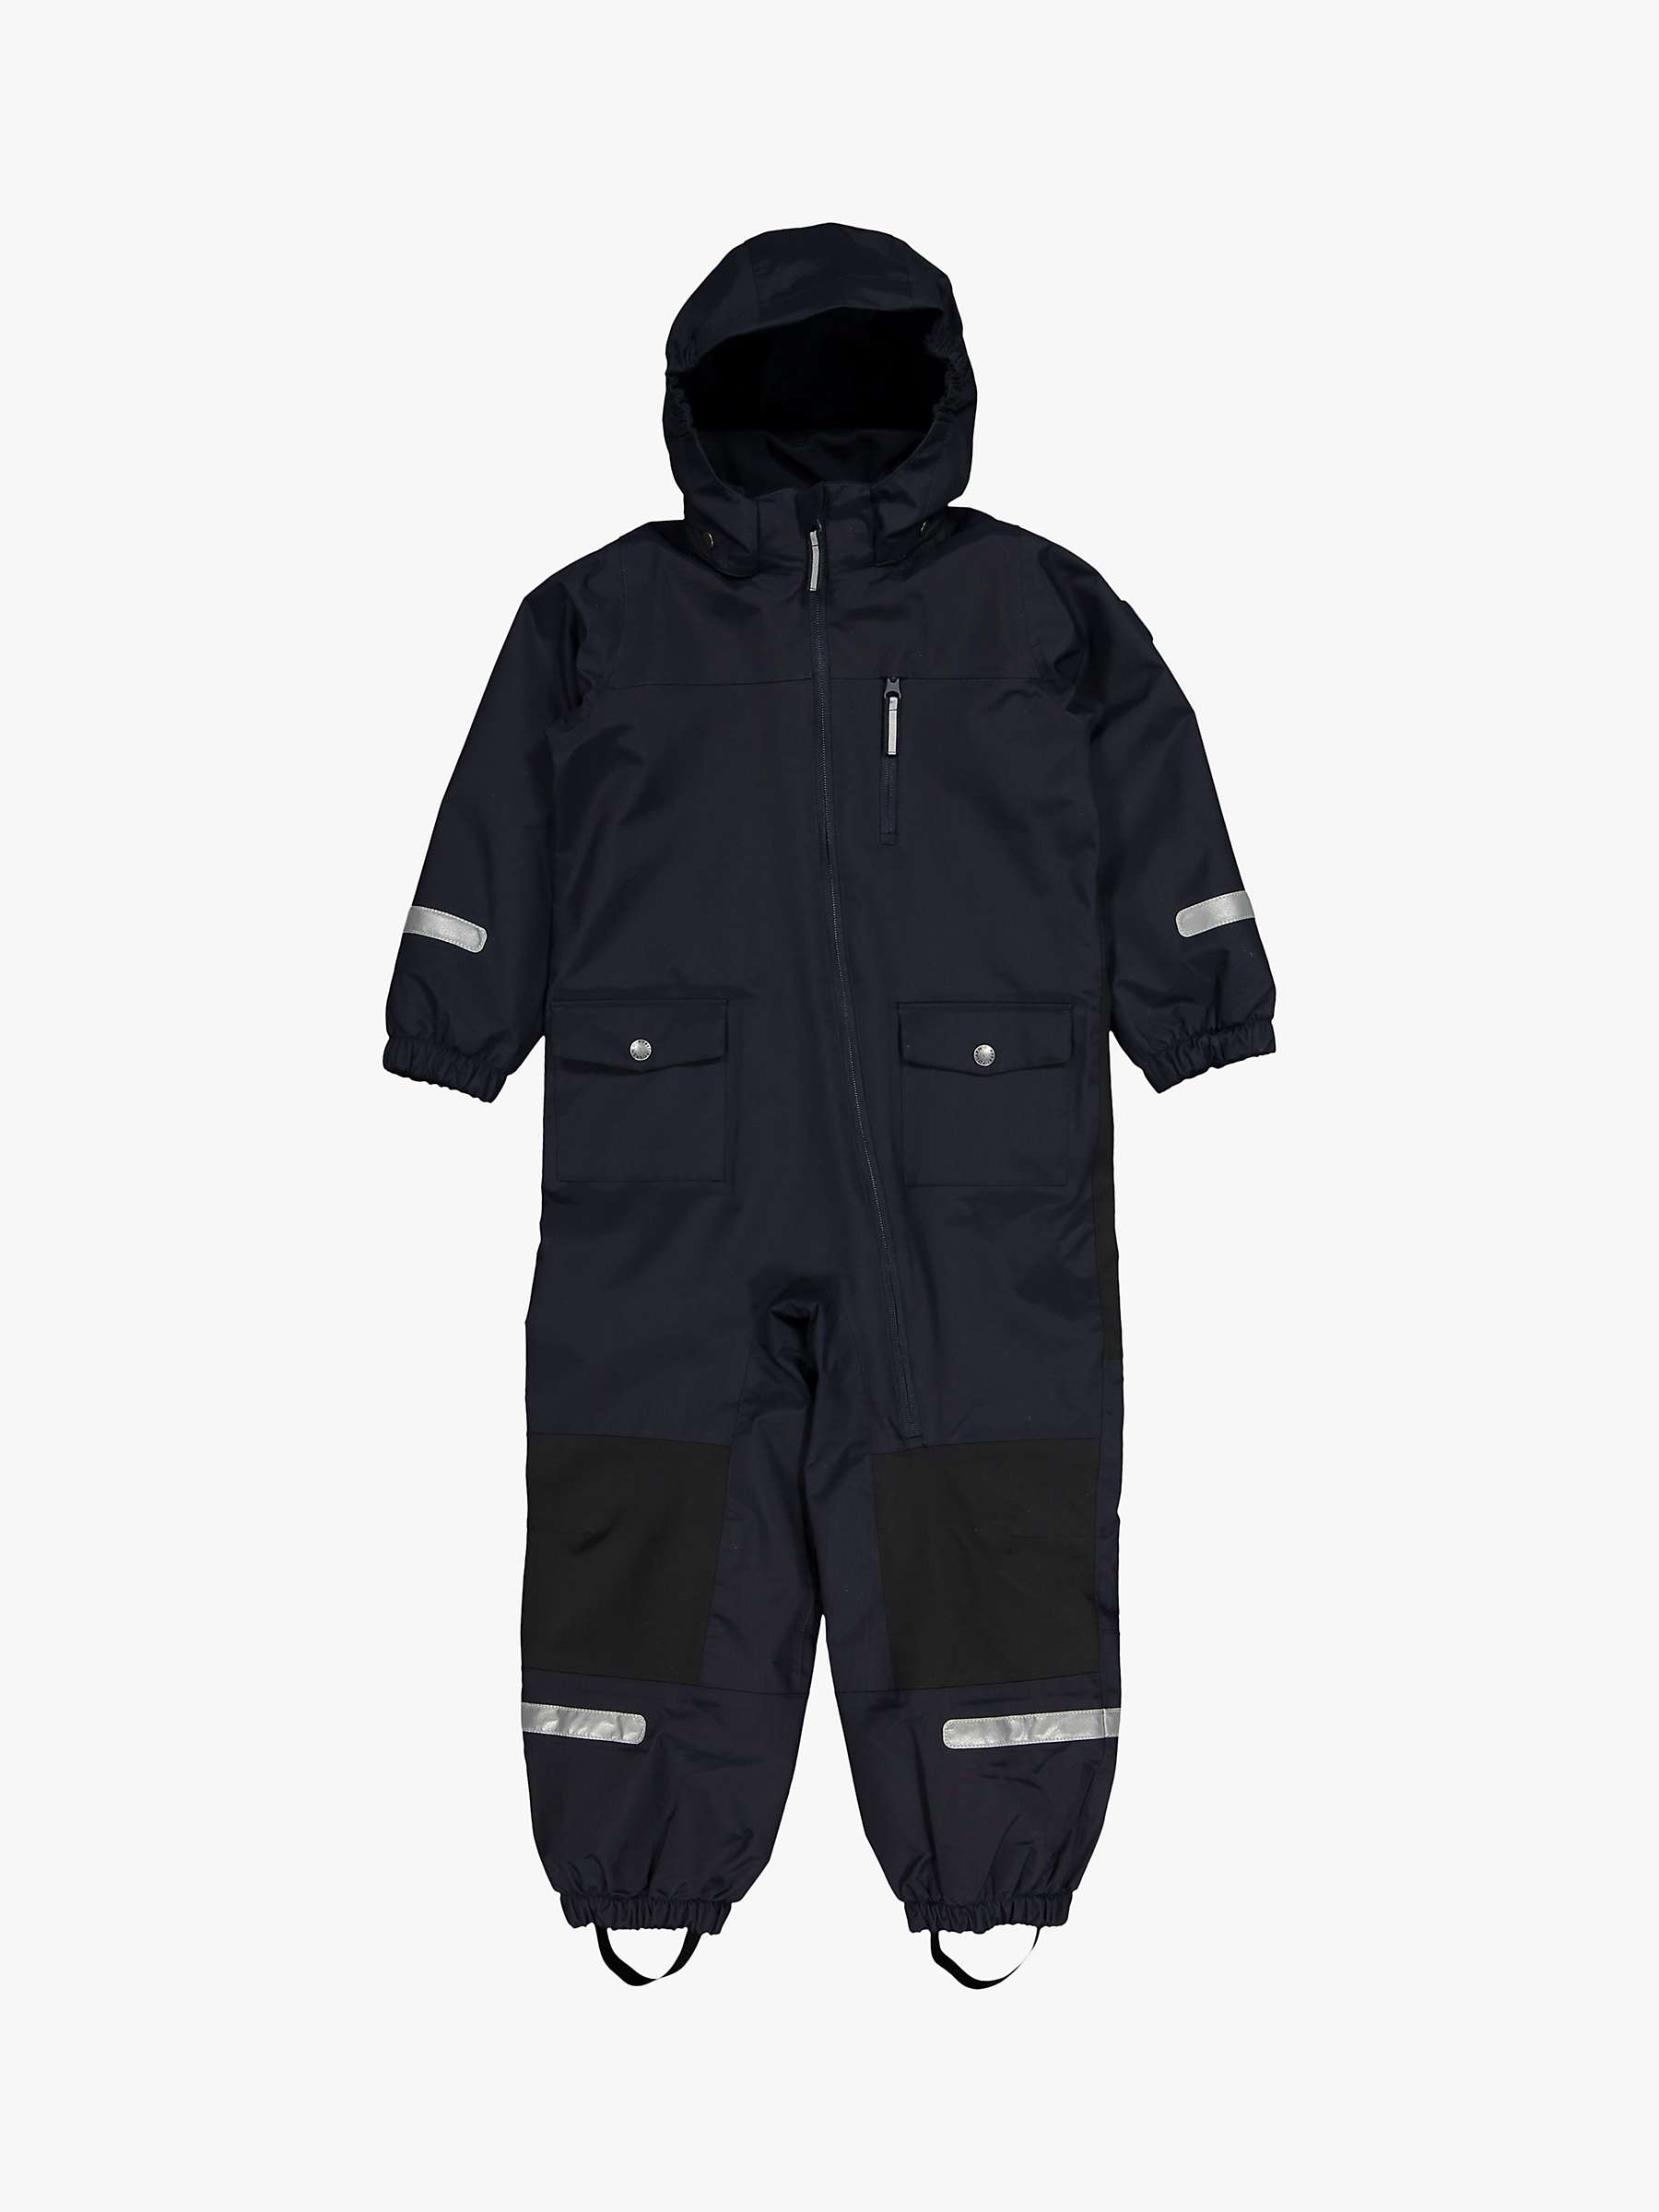 Buy Polarn O. Pyret Children's Waterproof Shell Overalls Online at johnlewis.com